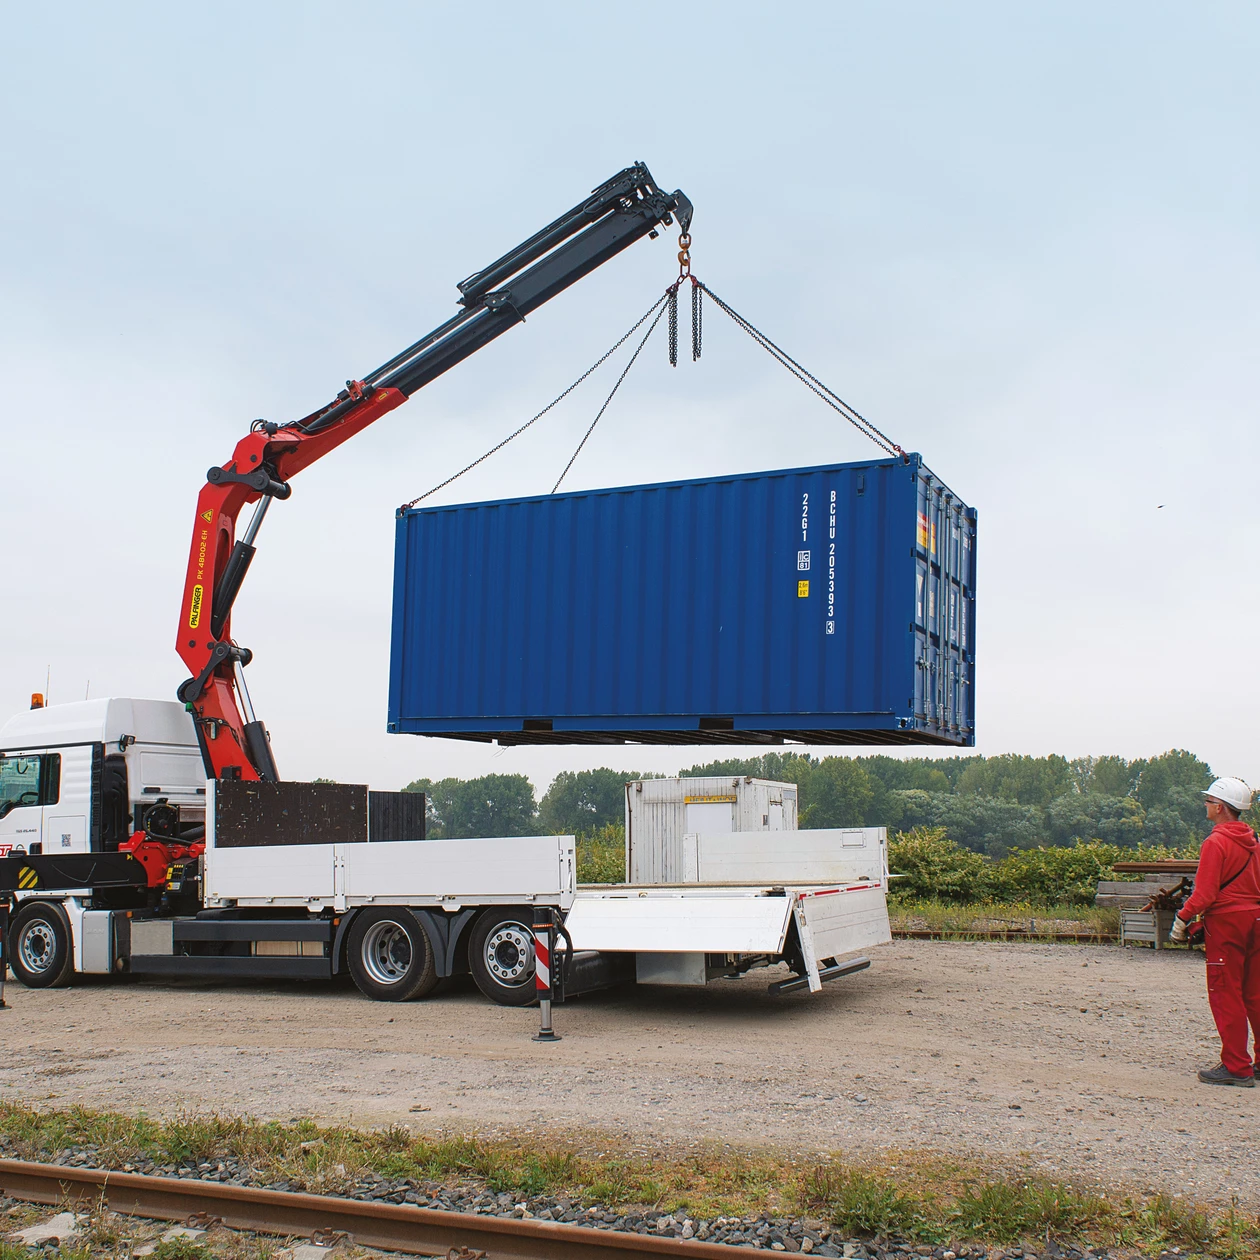 Vehicle Loading Crane competency and licensing